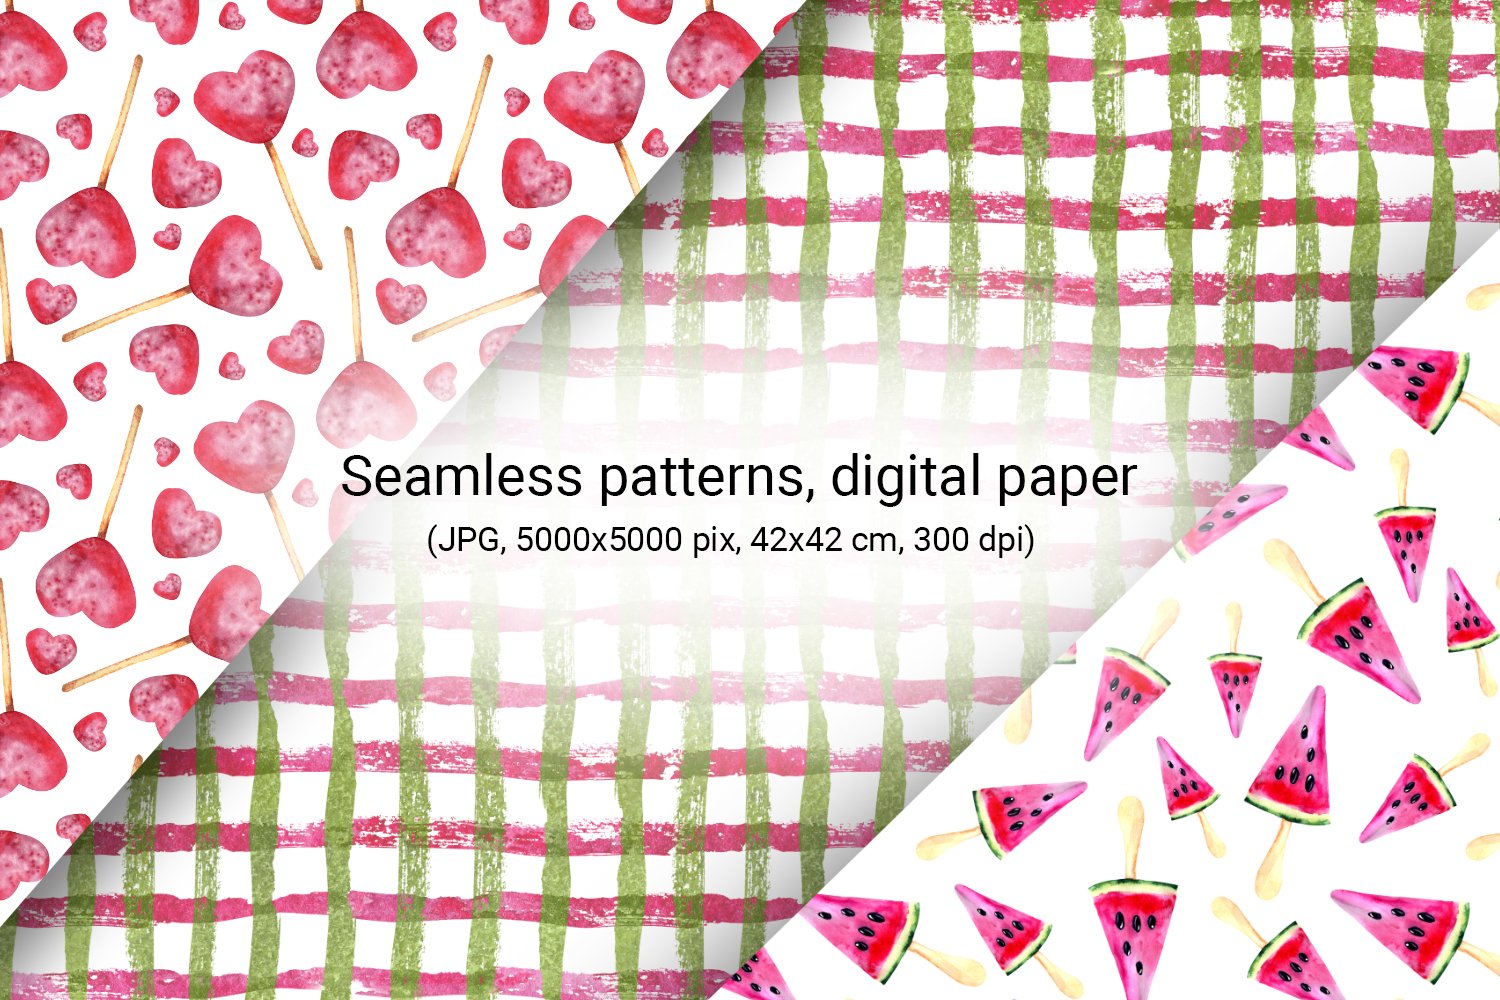 These patterns are great for summer party design, birthday, holiday menu, postcard.